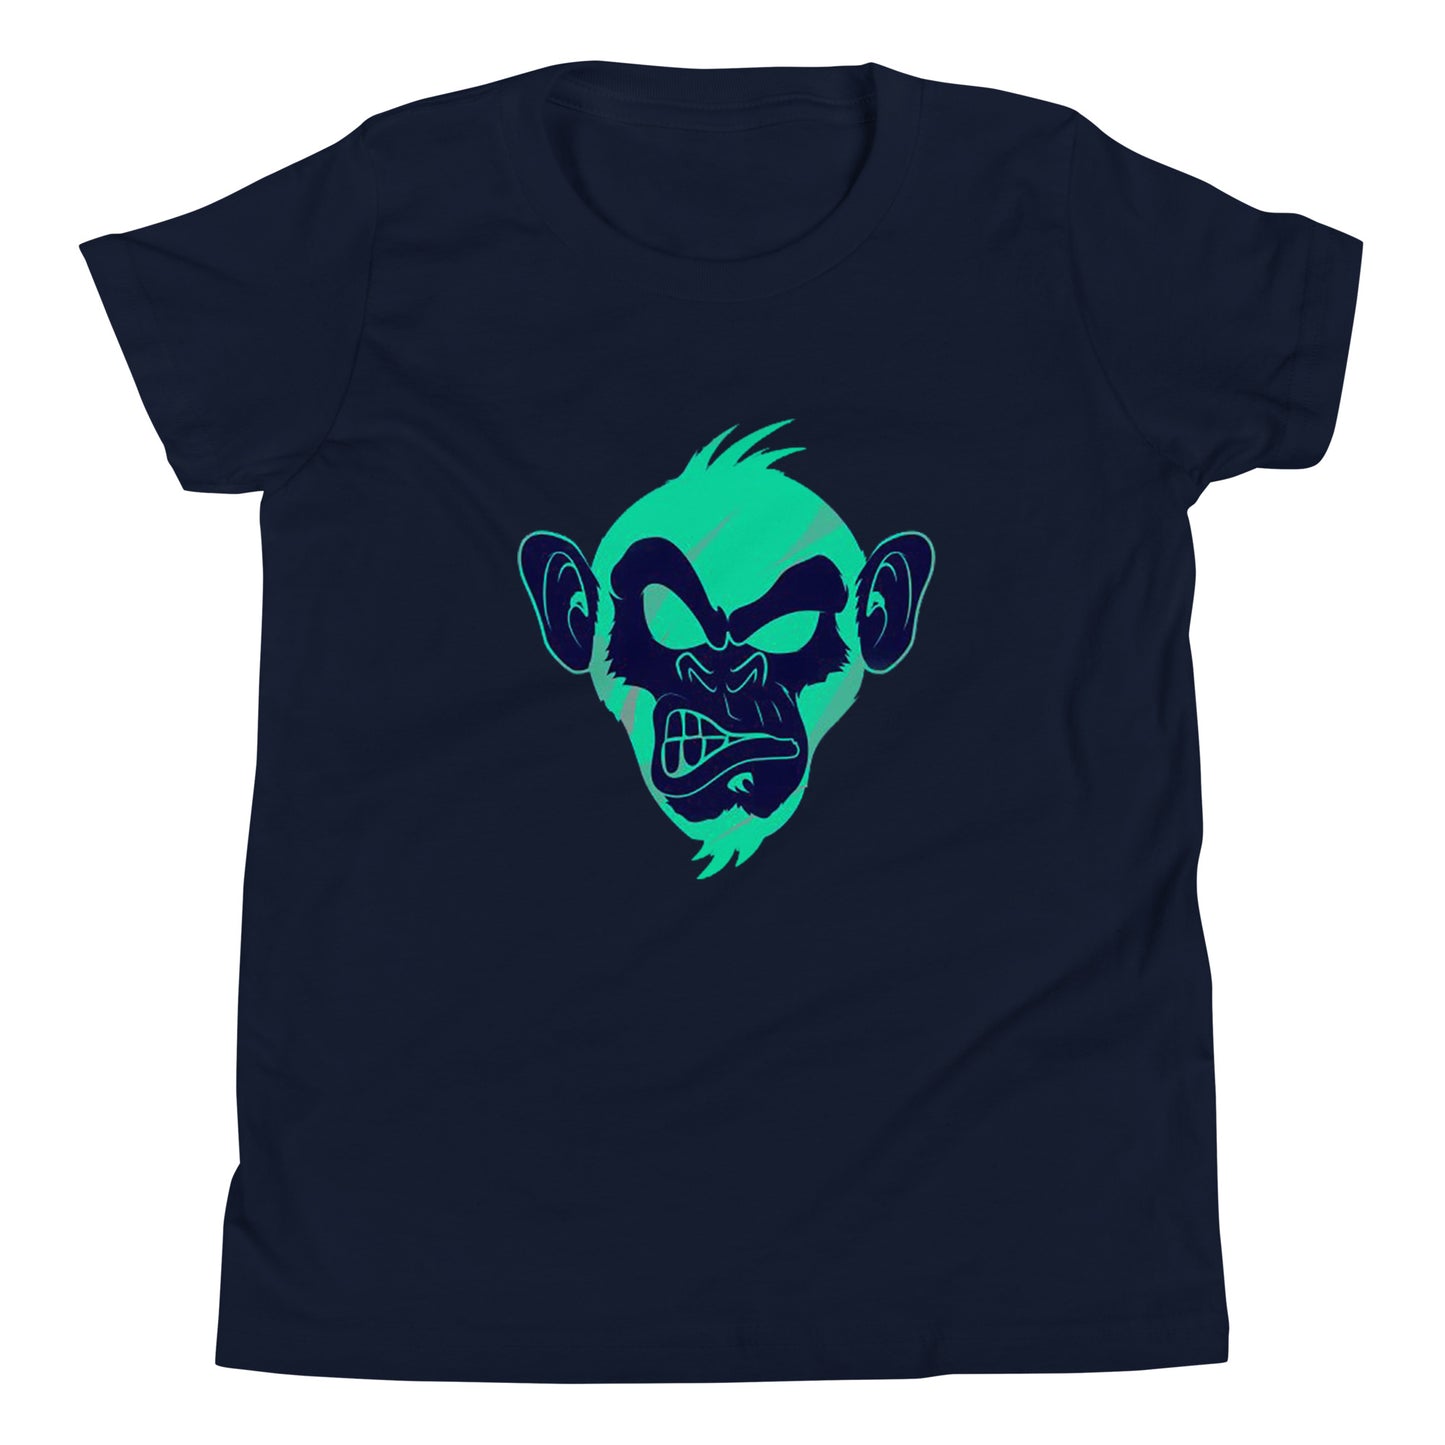 Navy T-shirt with print of a Cool monkey in black light green